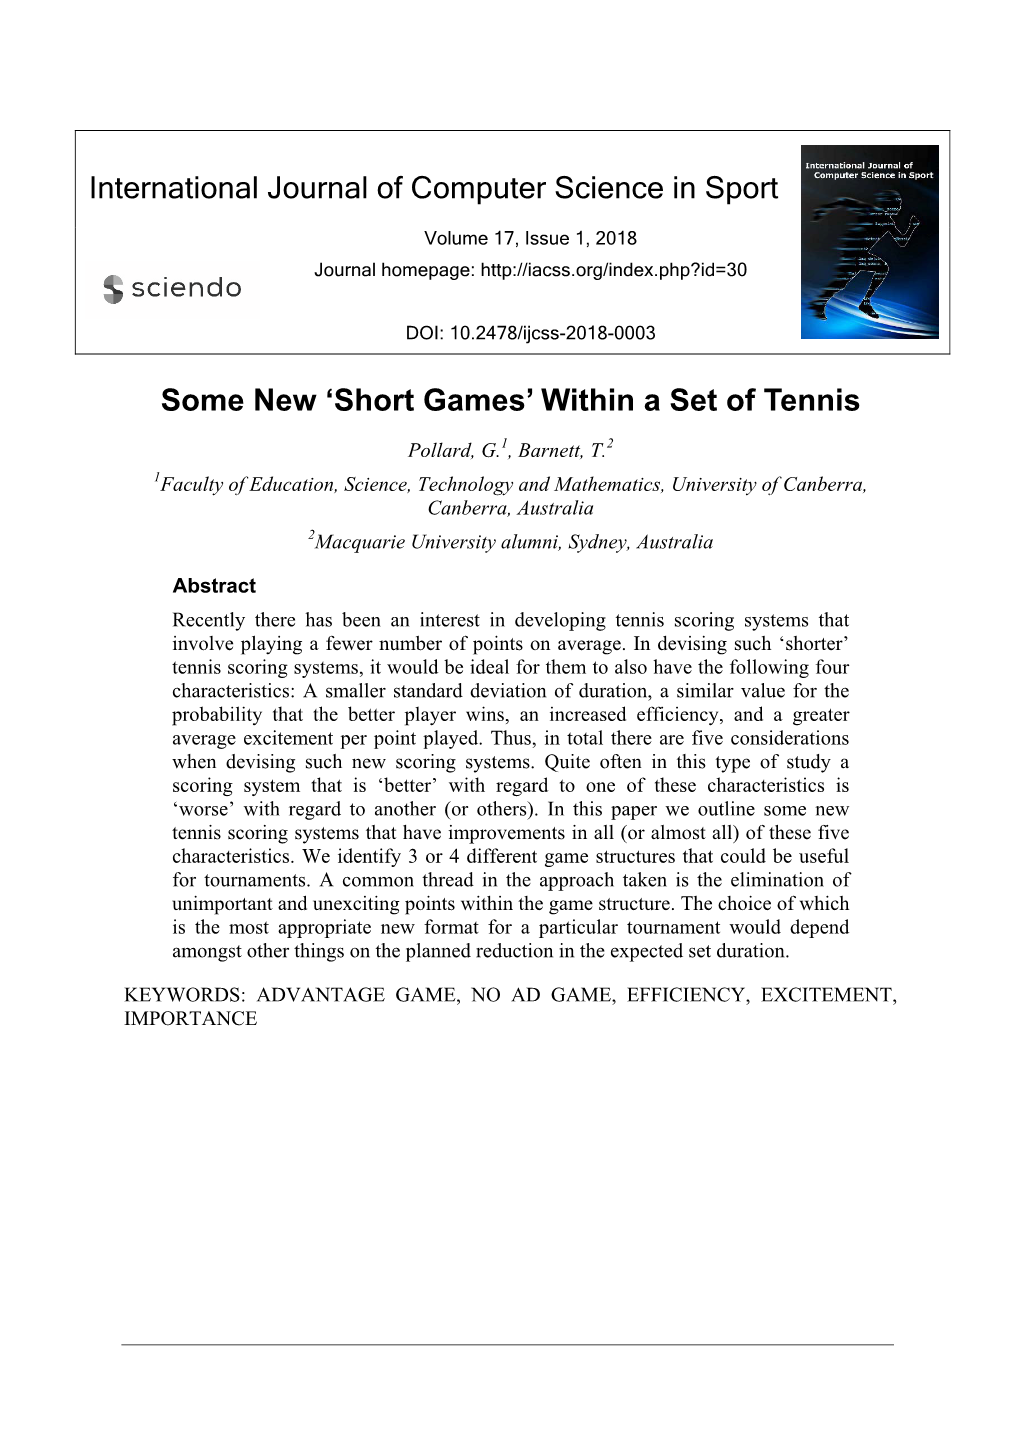 International Journal of Computer Science in Sport Some New 'Short Games' Within a Set of Tennis